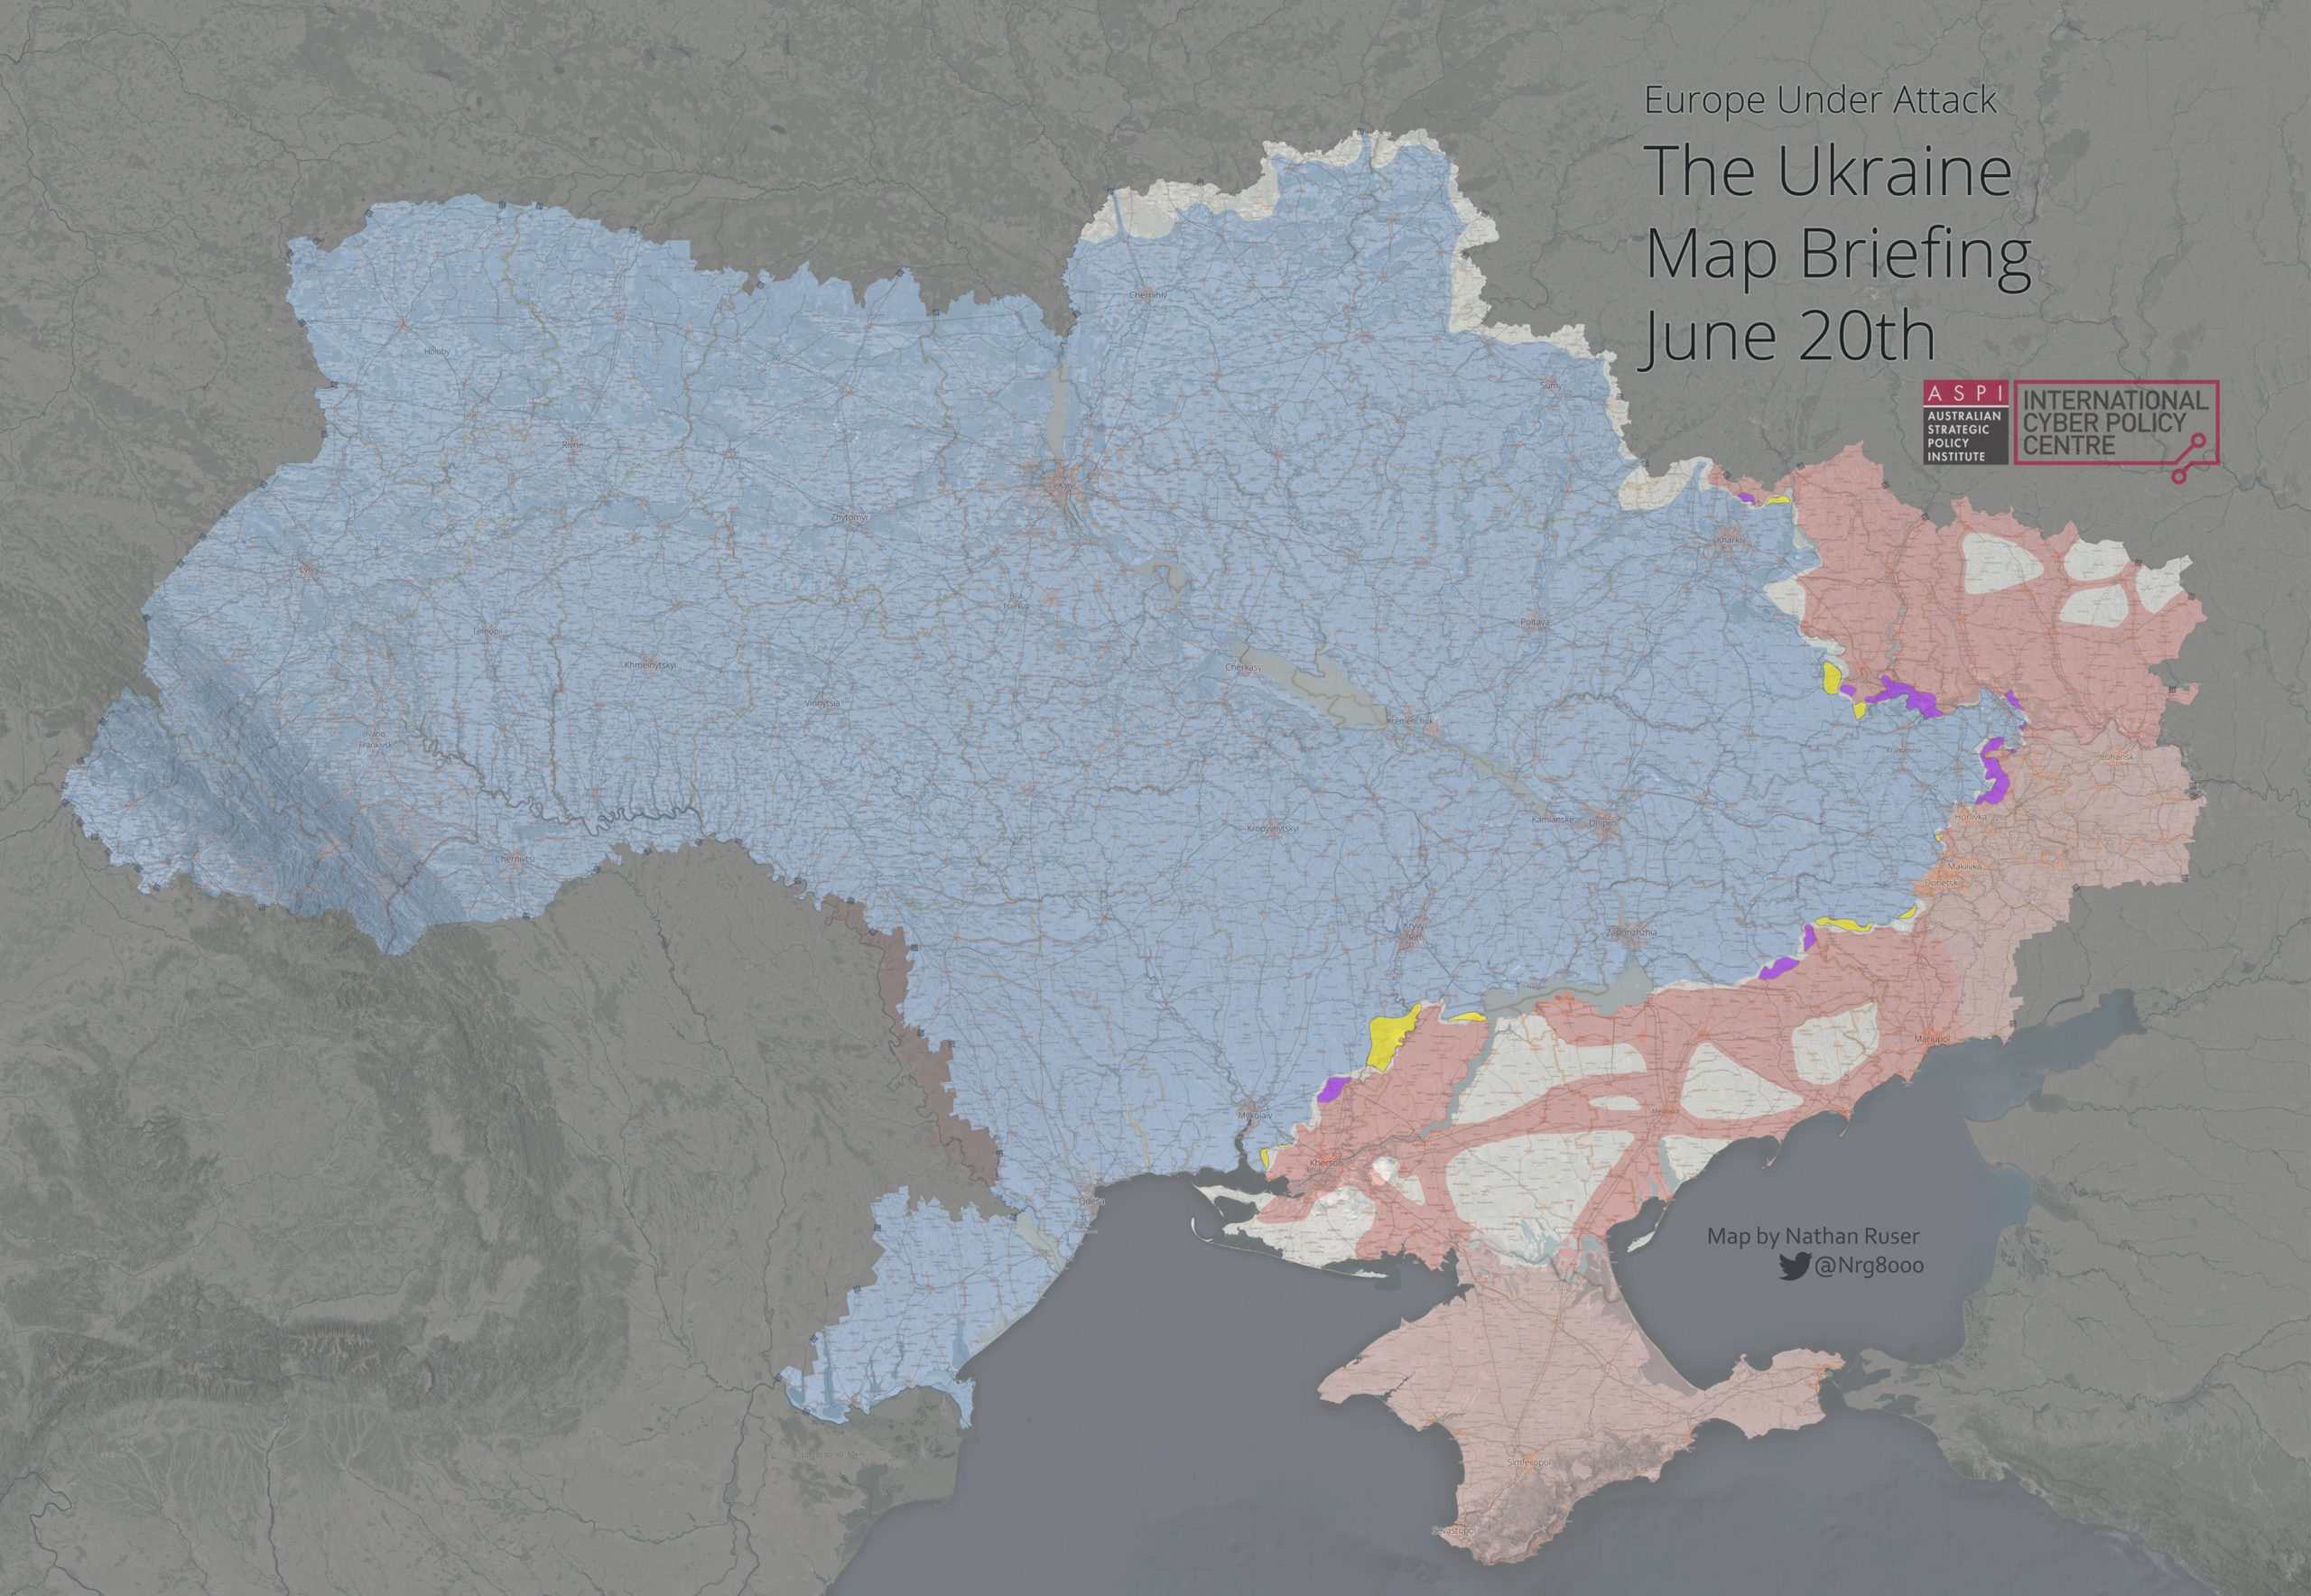 This map shows how little territory has changed hands in Ukraine over the past month. The fighting has shifted to very slow and grinding advances, reliant on artillery more than maneuver. Russian gains are in purple, Ukrainian gains in yellow. Credit: Twitter.com/nrg8000 ~